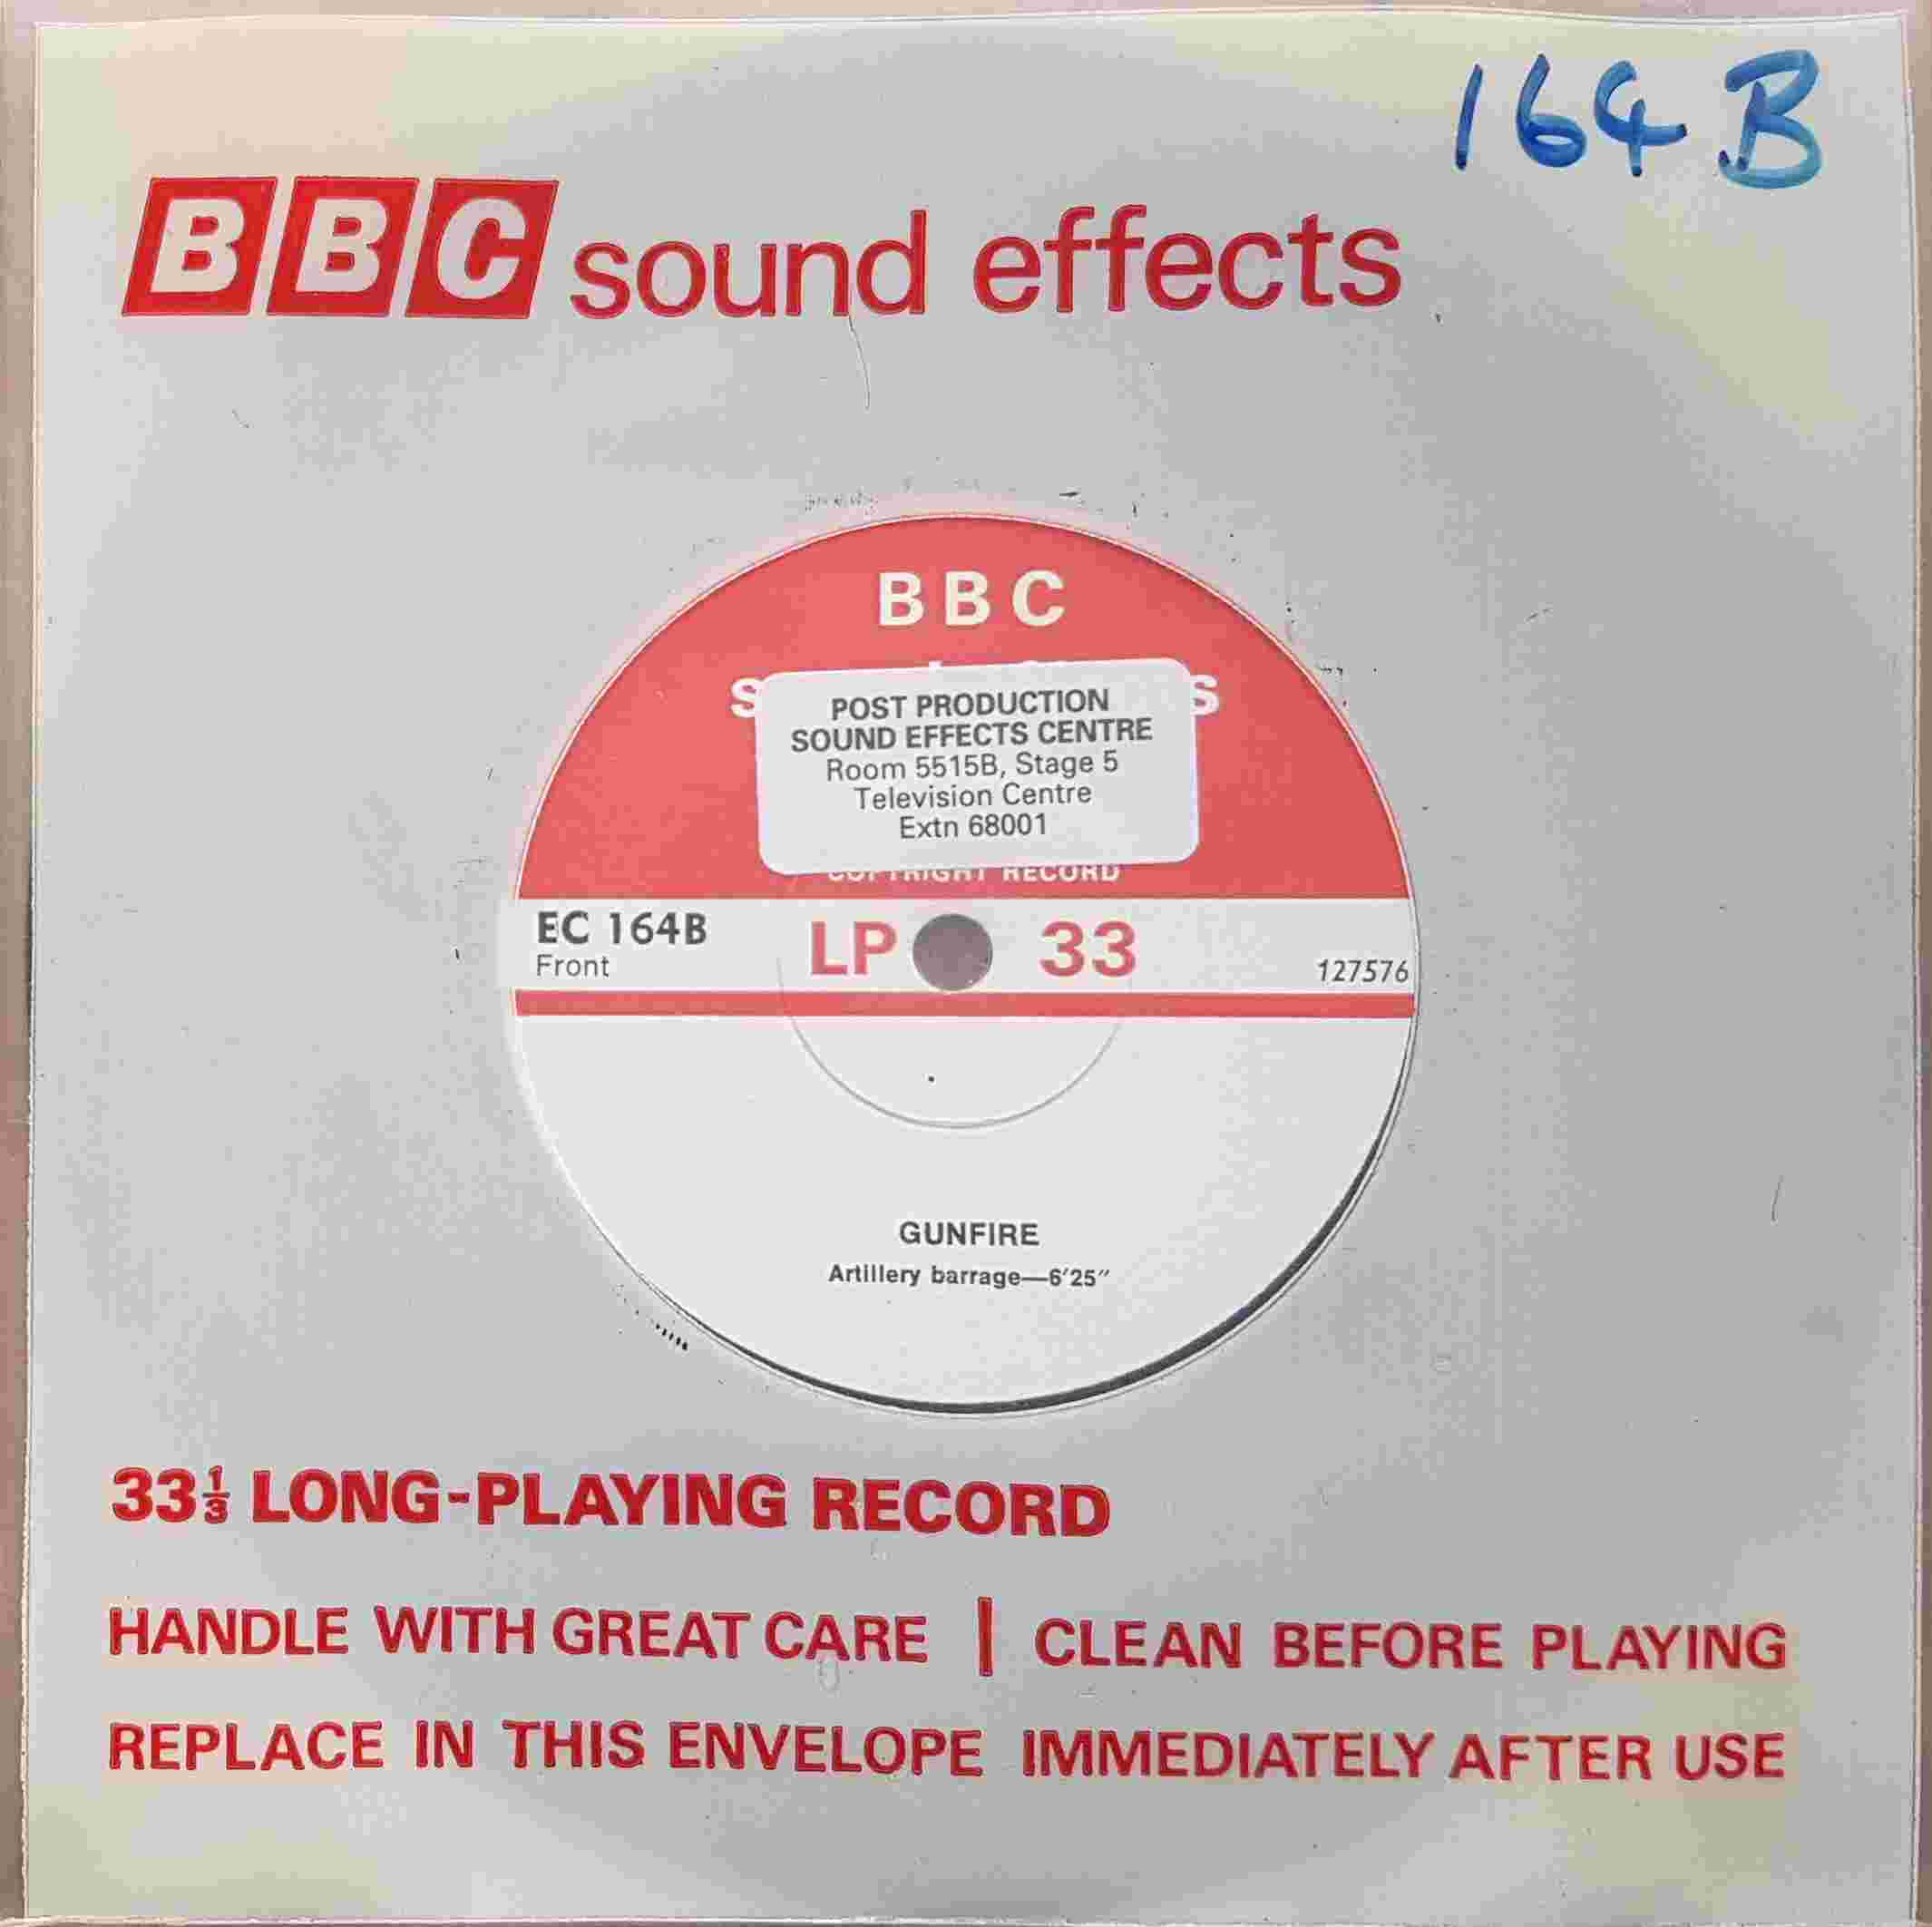 Picture of EC 164B Gunfire by artist Not registered from the BBC records and Tapes library